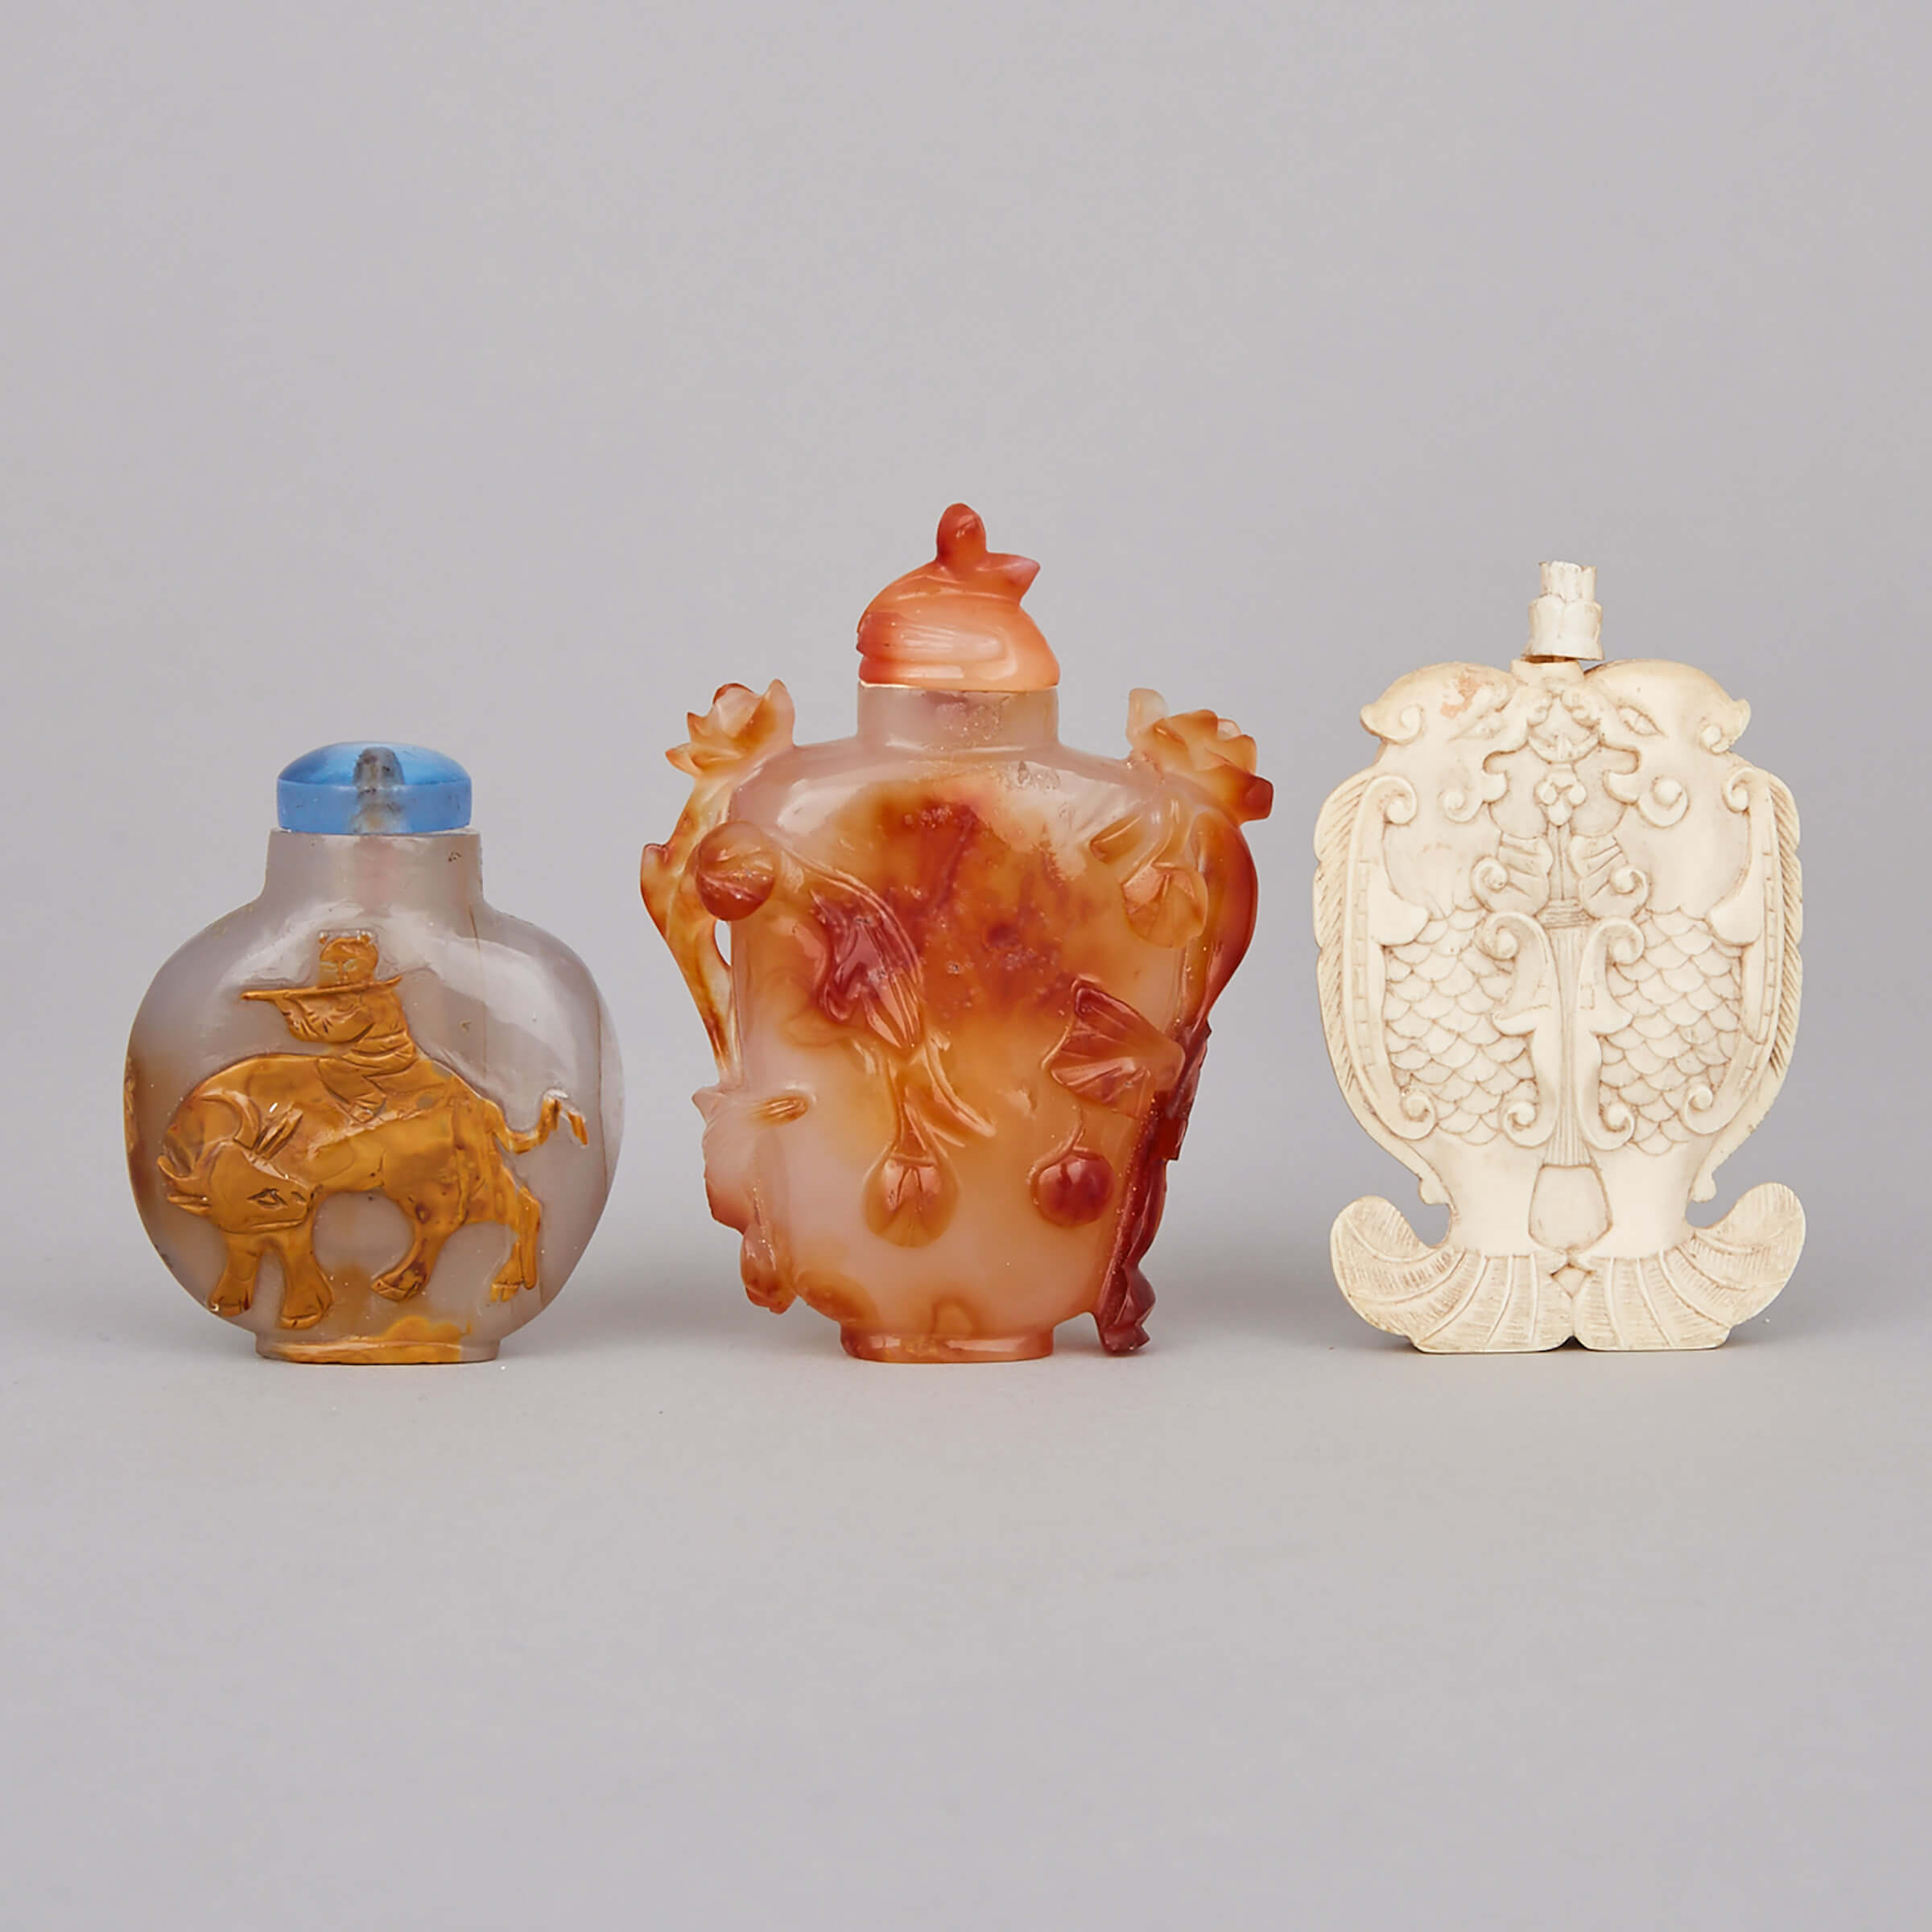 A Group of Three Snuff Bottles, Late 19th/Early 20th Century